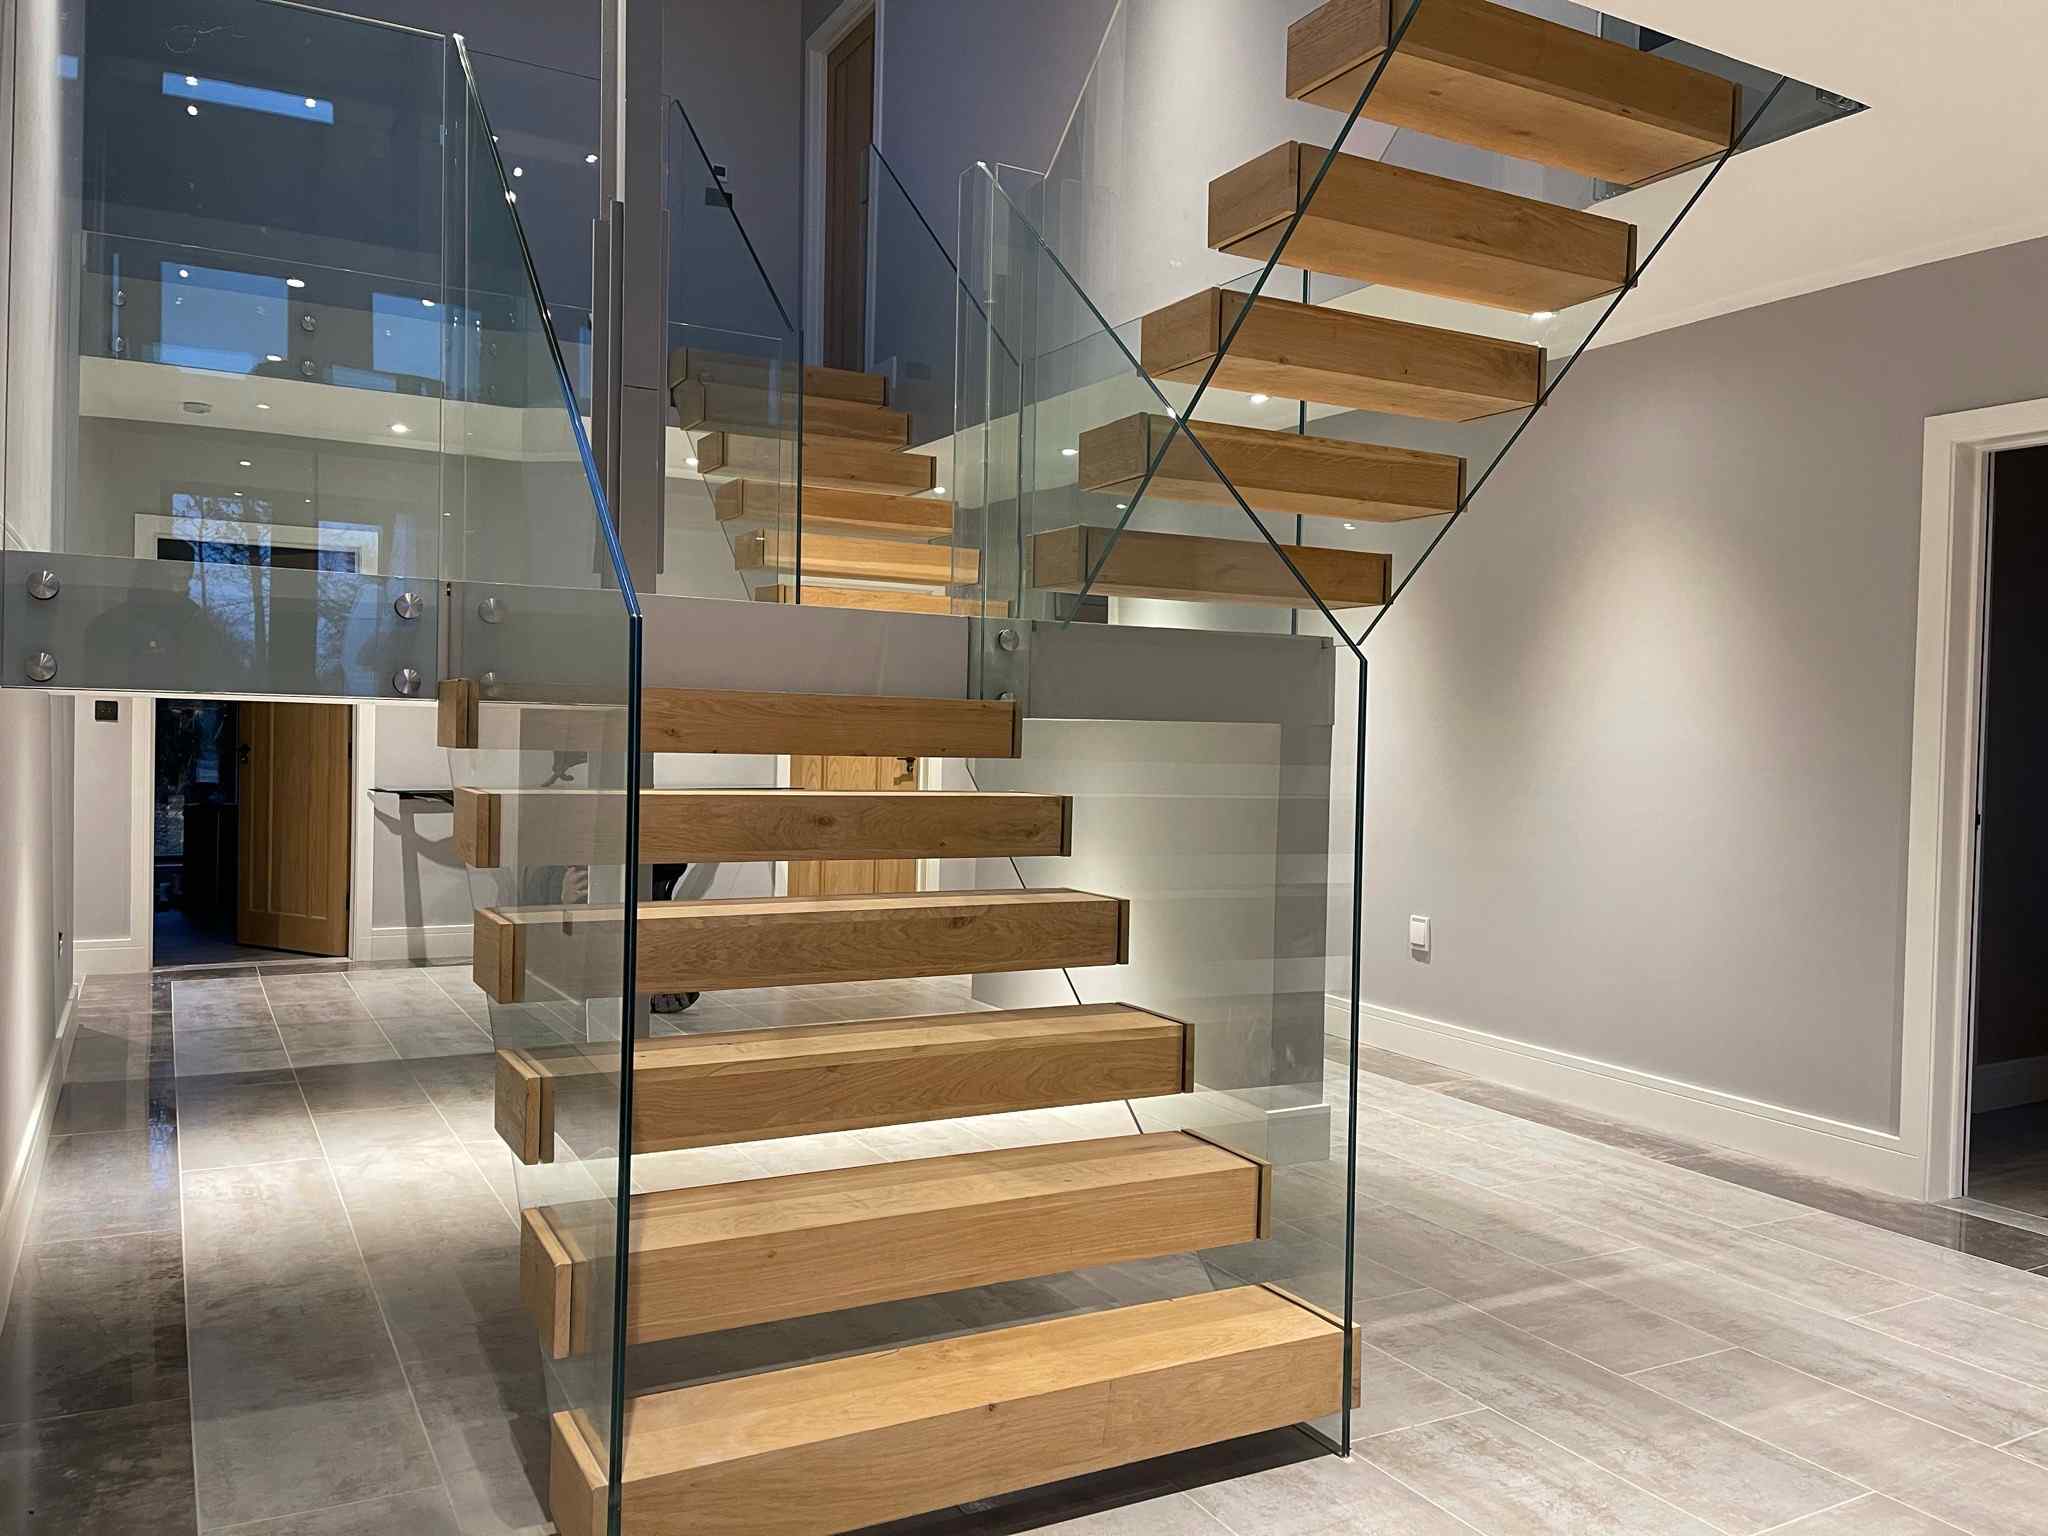 Flying staircase with glass balustrades